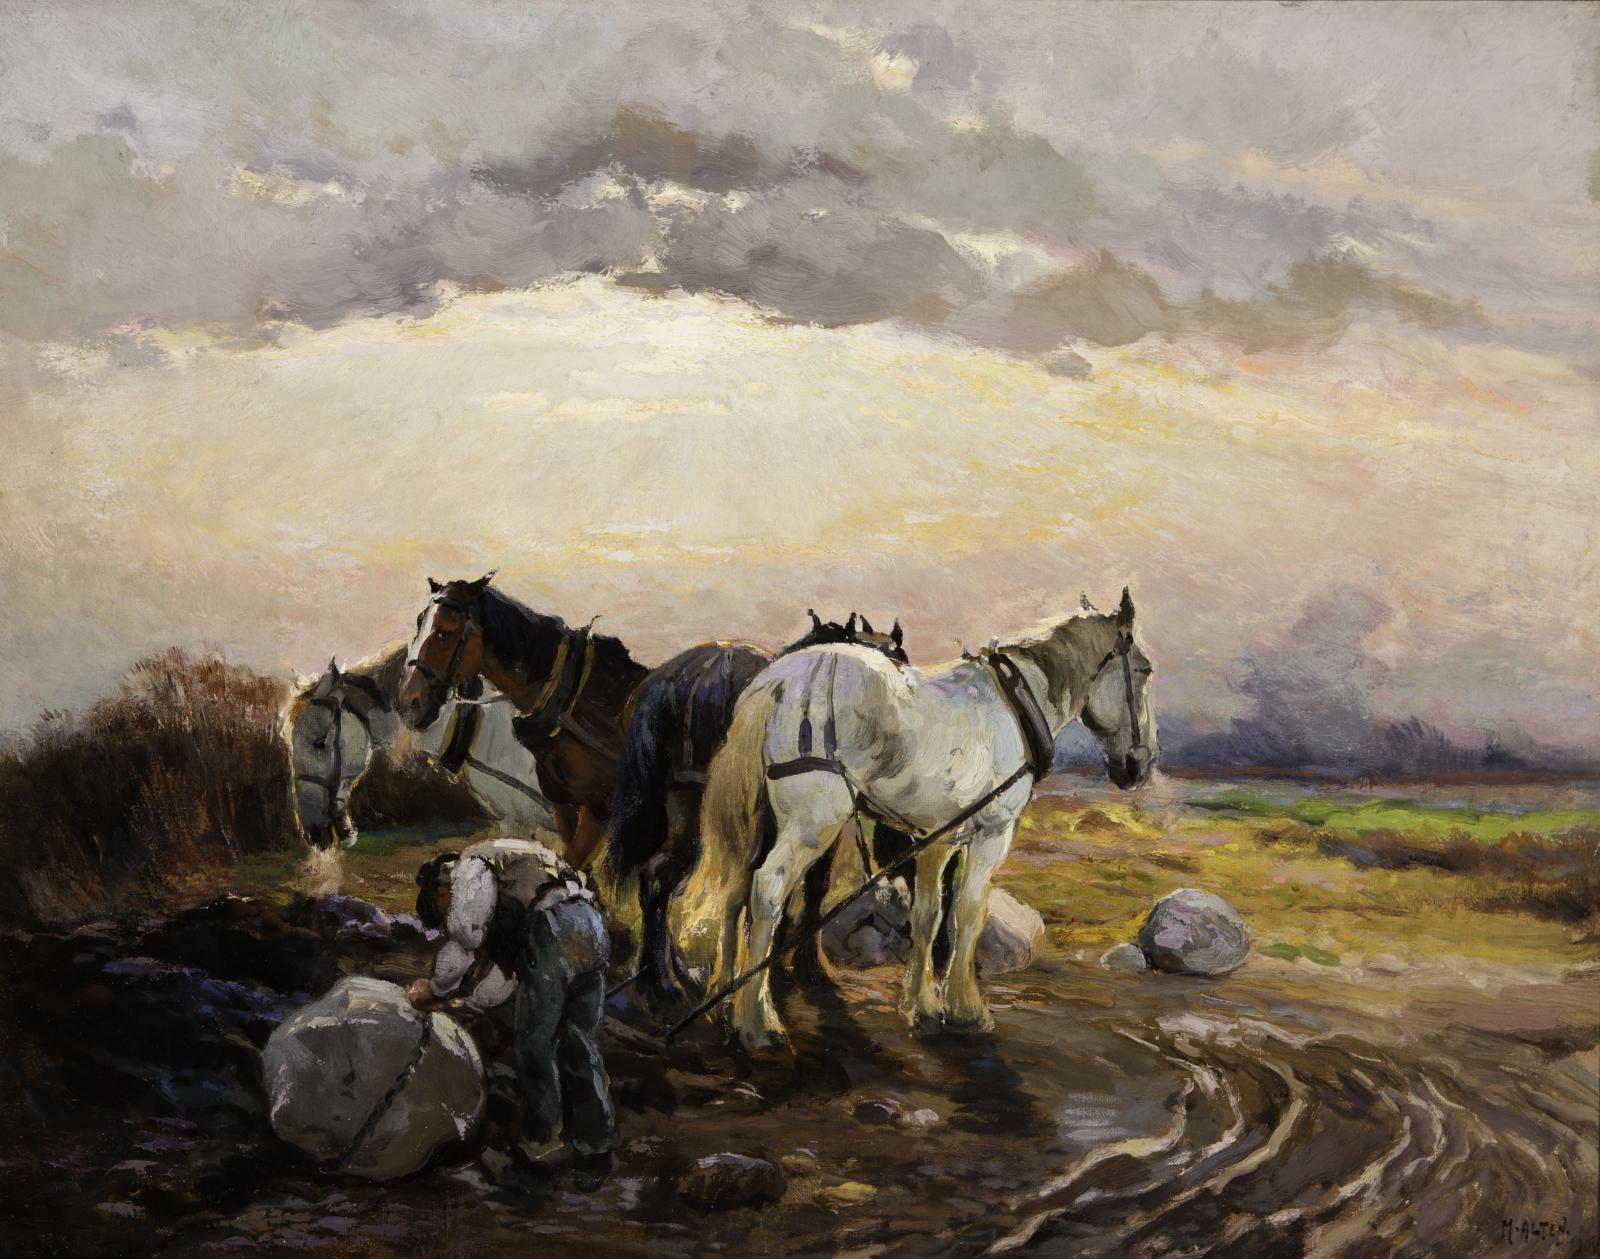 Four horses getting ready to pull a large rock that a farmer is strapping up.